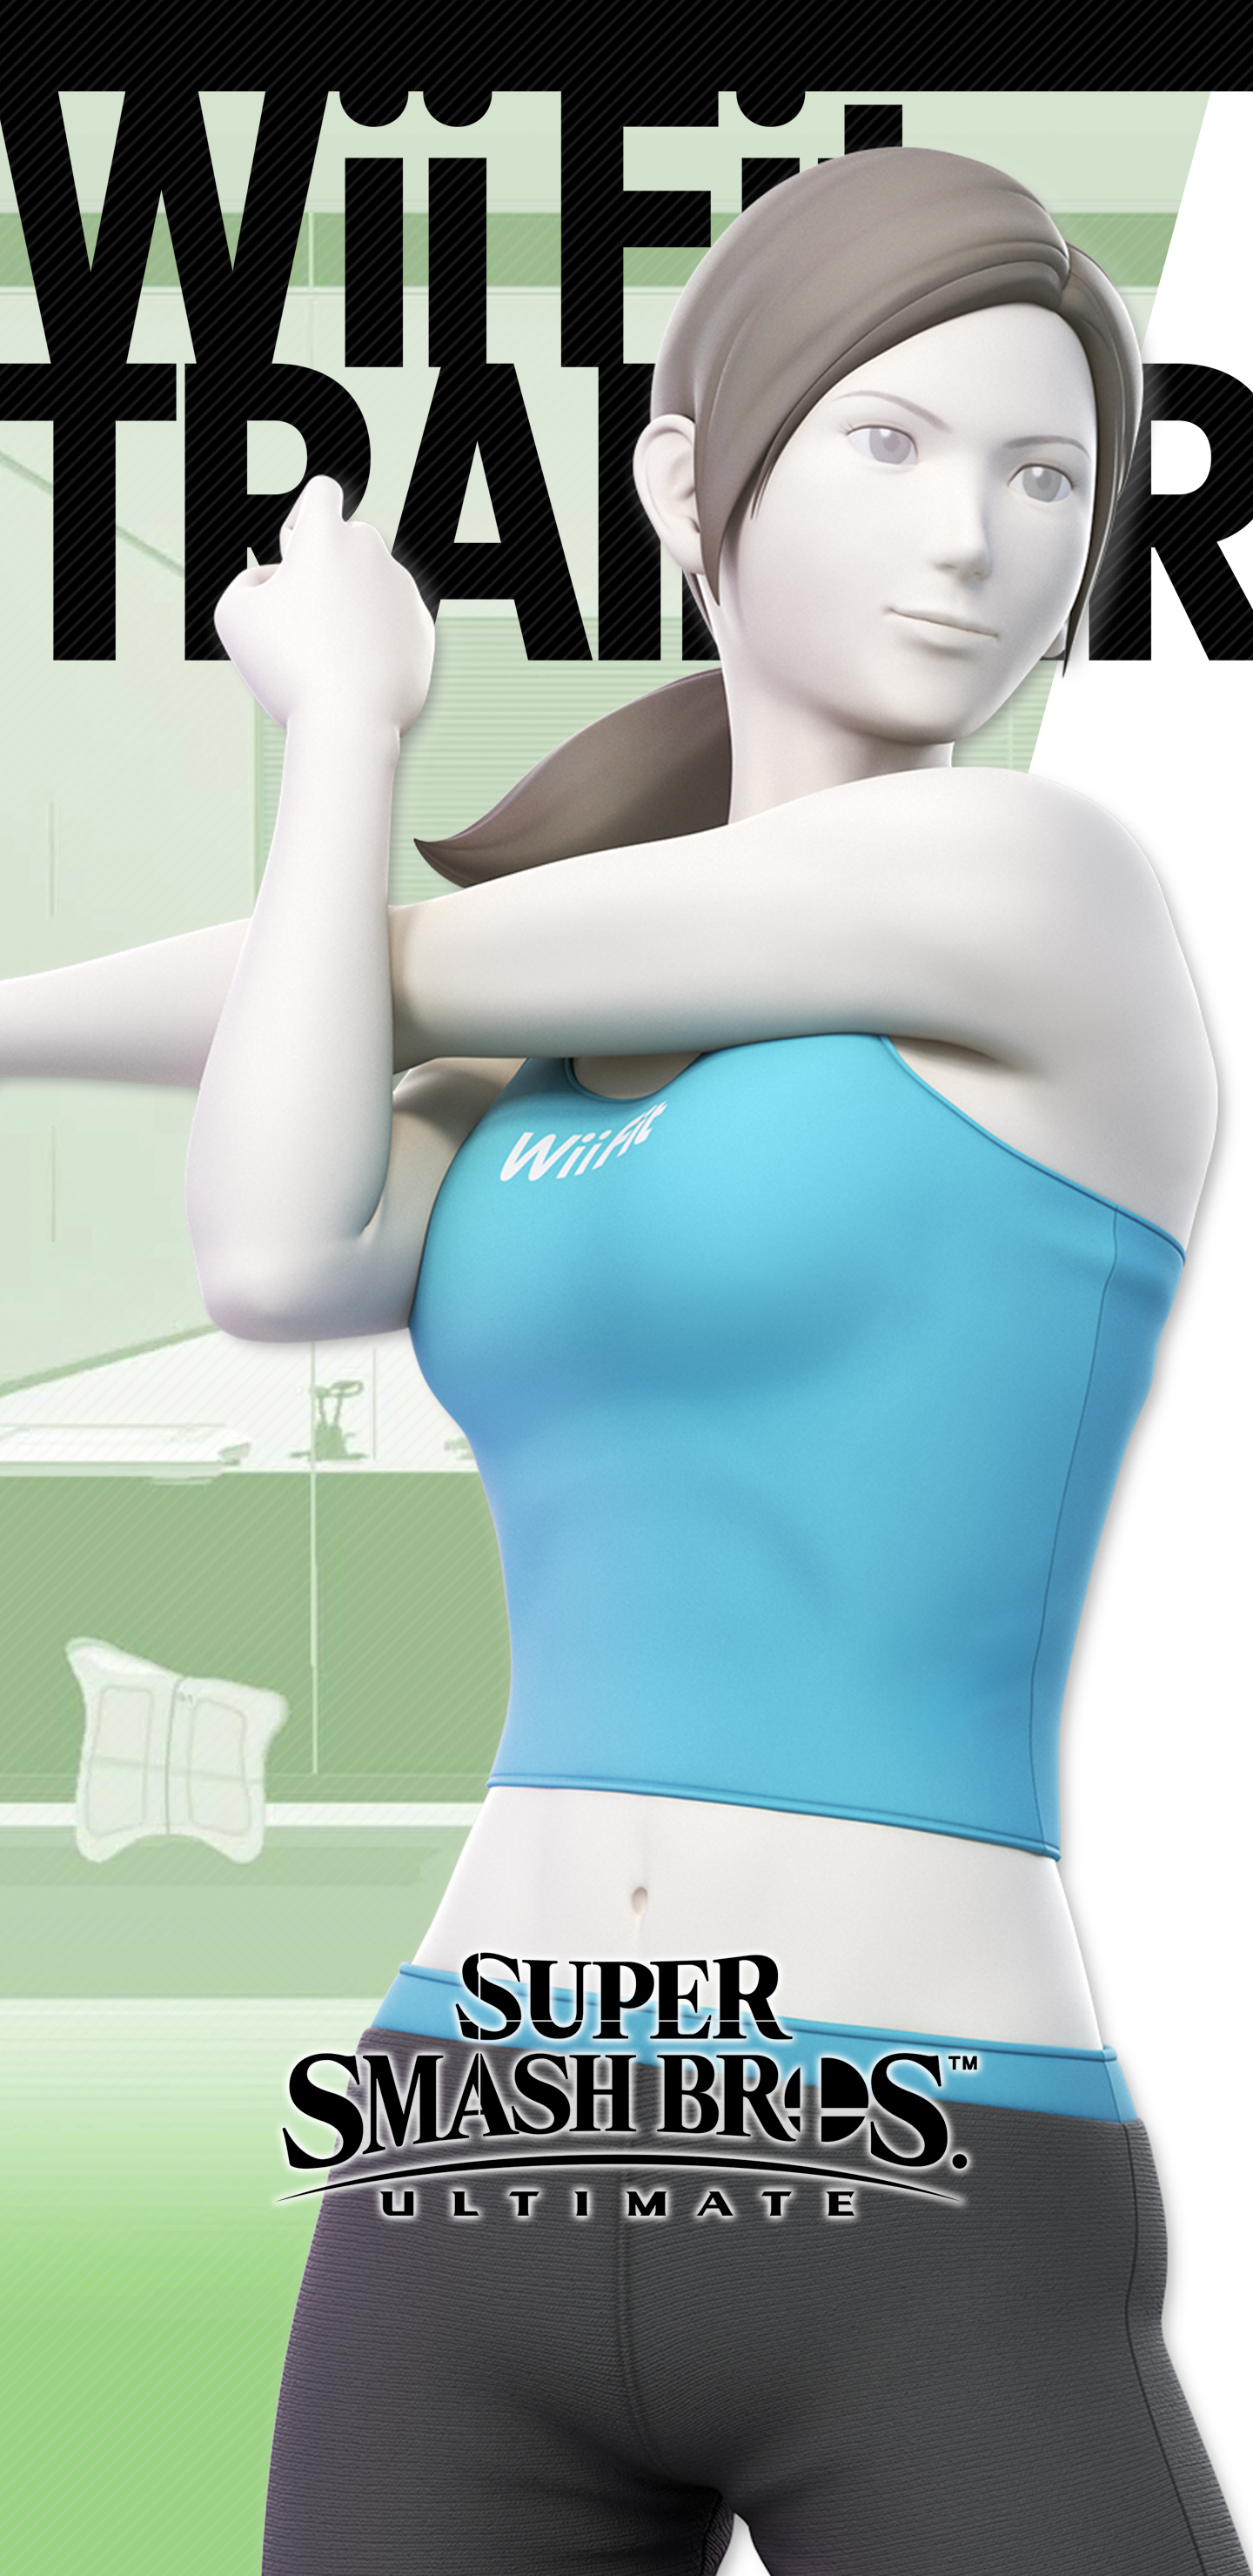 Wii Fit Trainer Smash Bros Ultimate Meme Wii Fit Trainer Whips You 